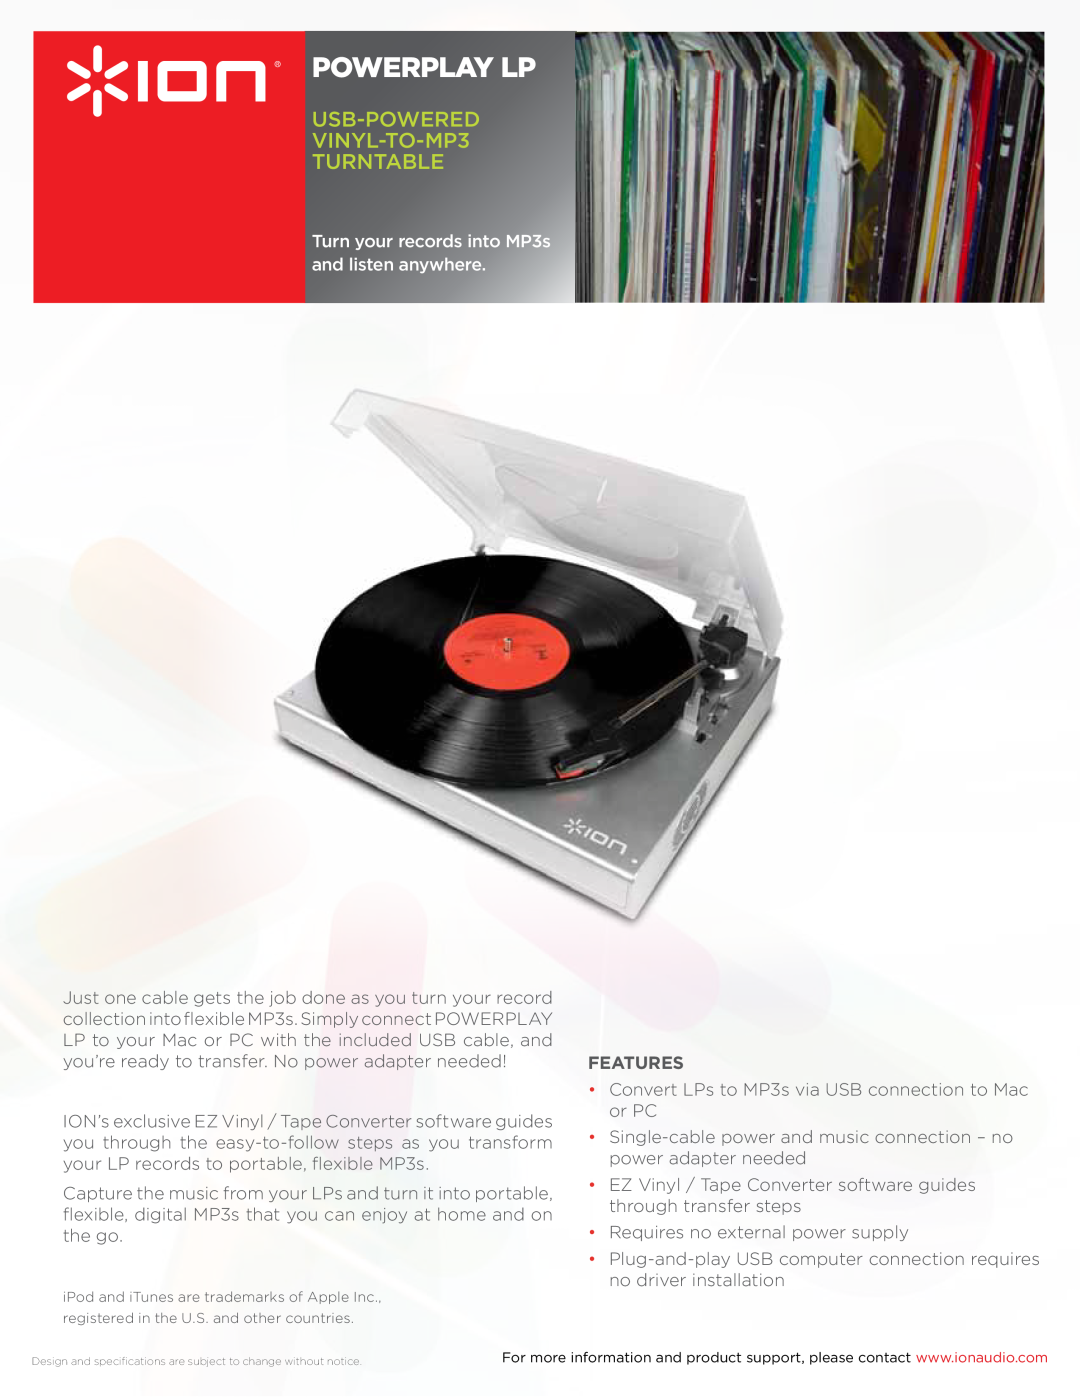 ION POWERPLAY LP specifications Powerplay Lp, USB-POWERED VINYL-TO-MP3 TURNTABLE, Features 